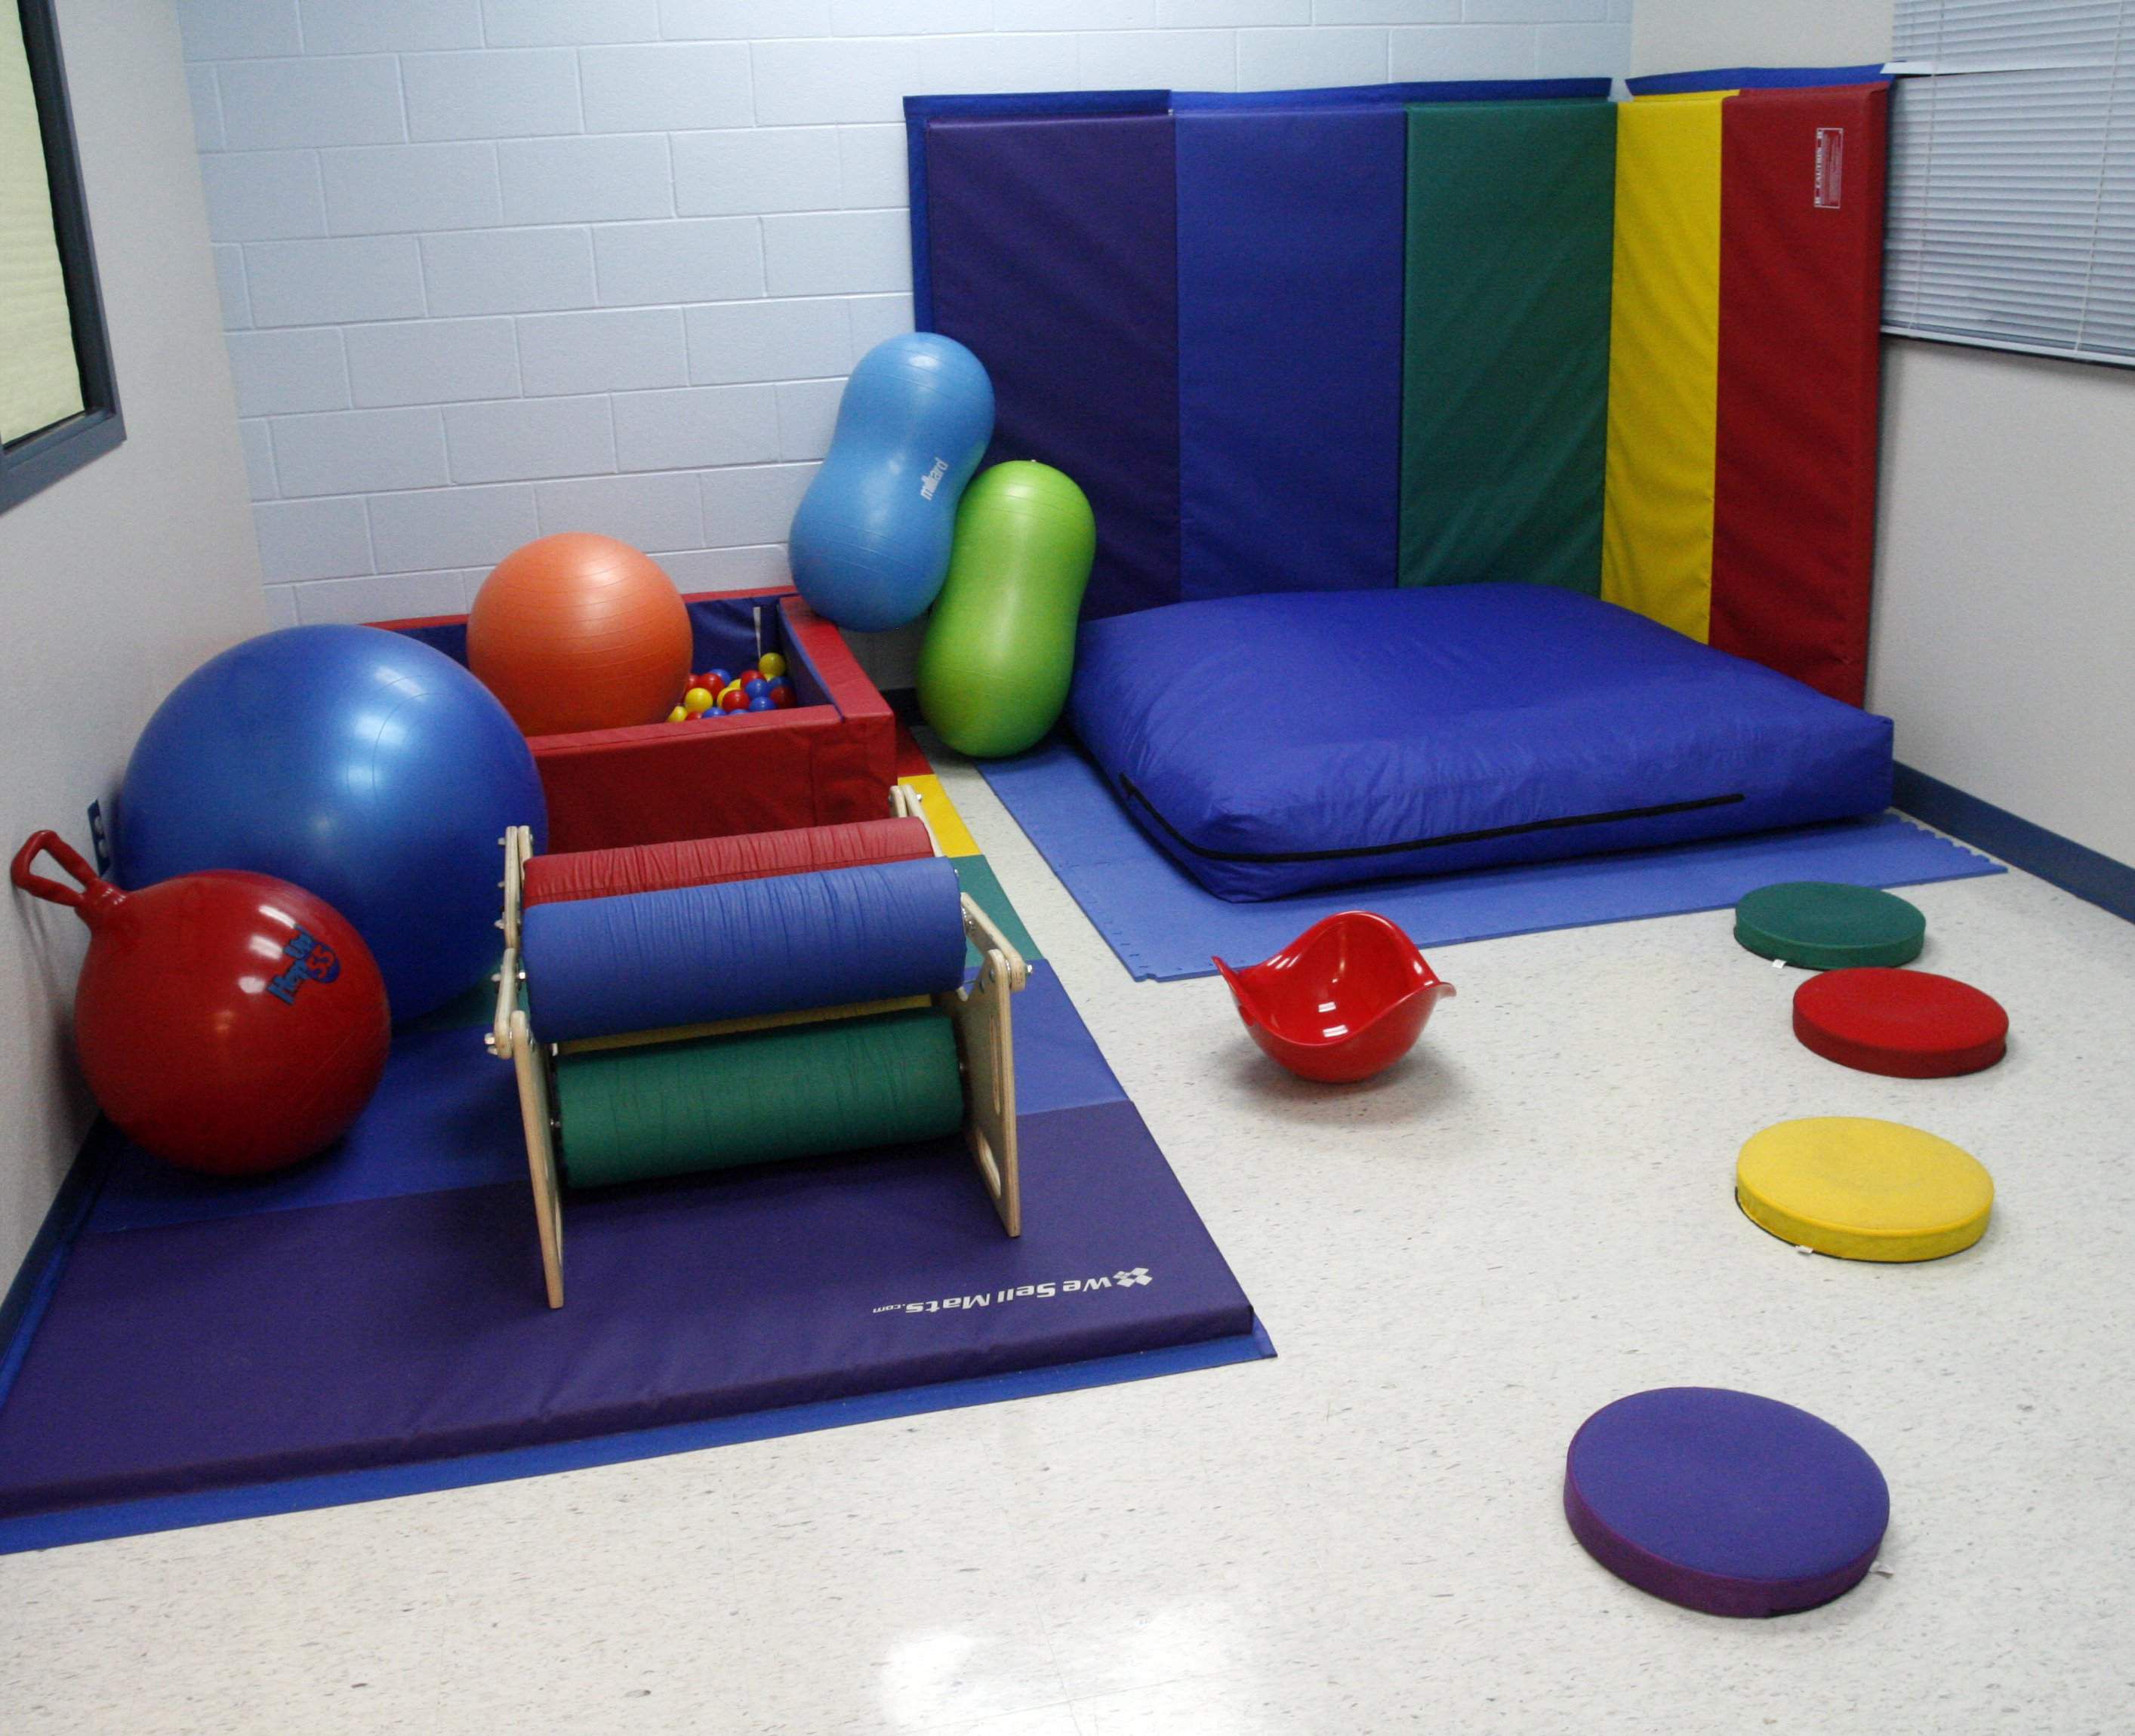 Pasco sensory room a comforting resource for students with autism